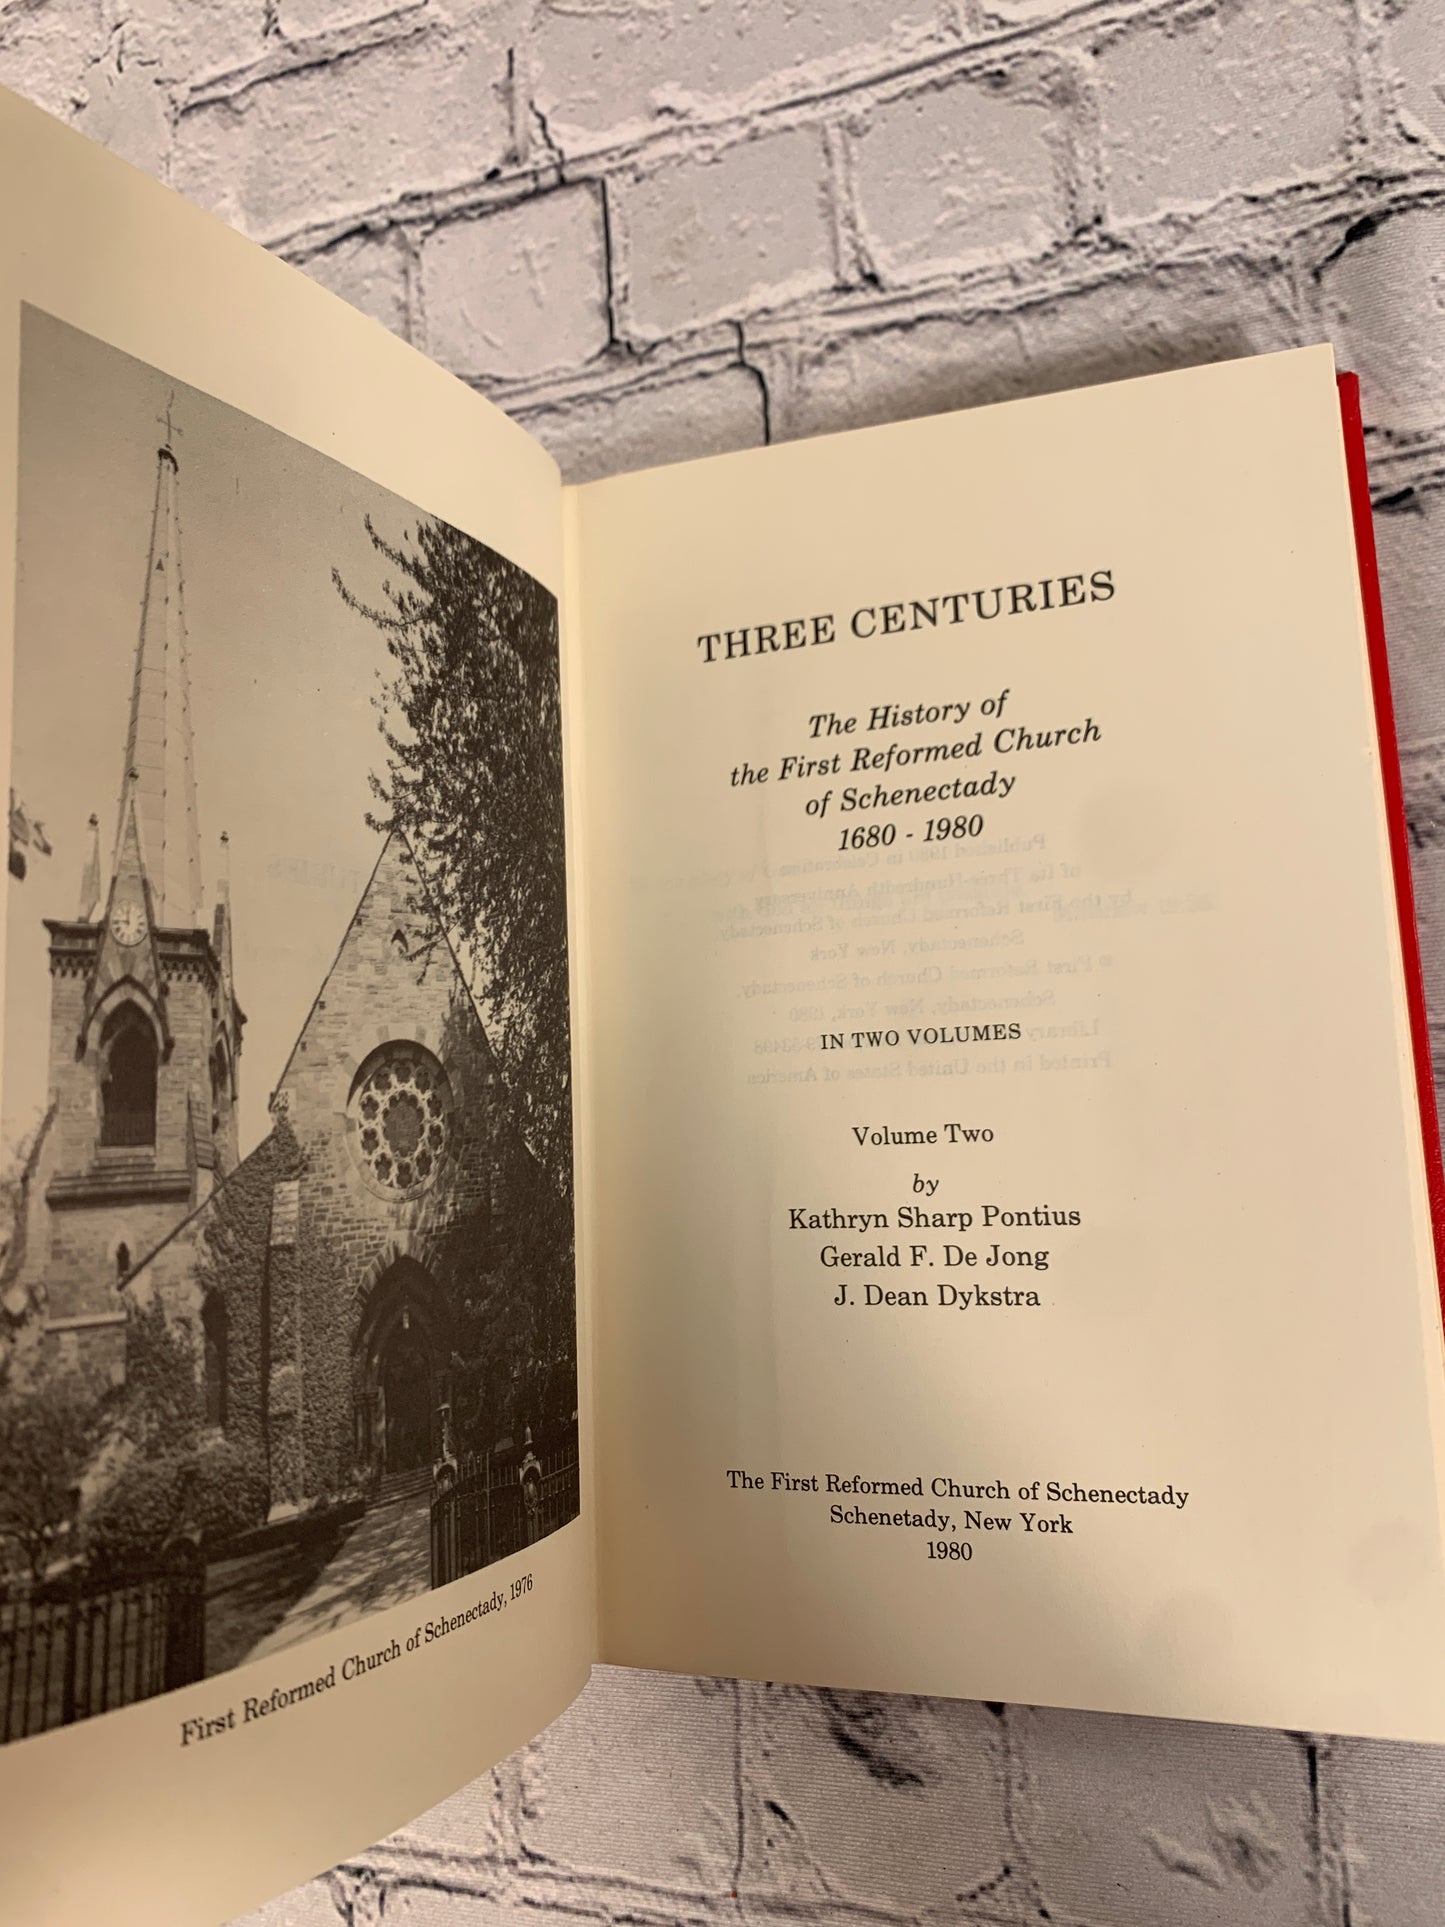 Three Centuries: History of the First Reformed Church of Schenectady 1680-1980 [1980]